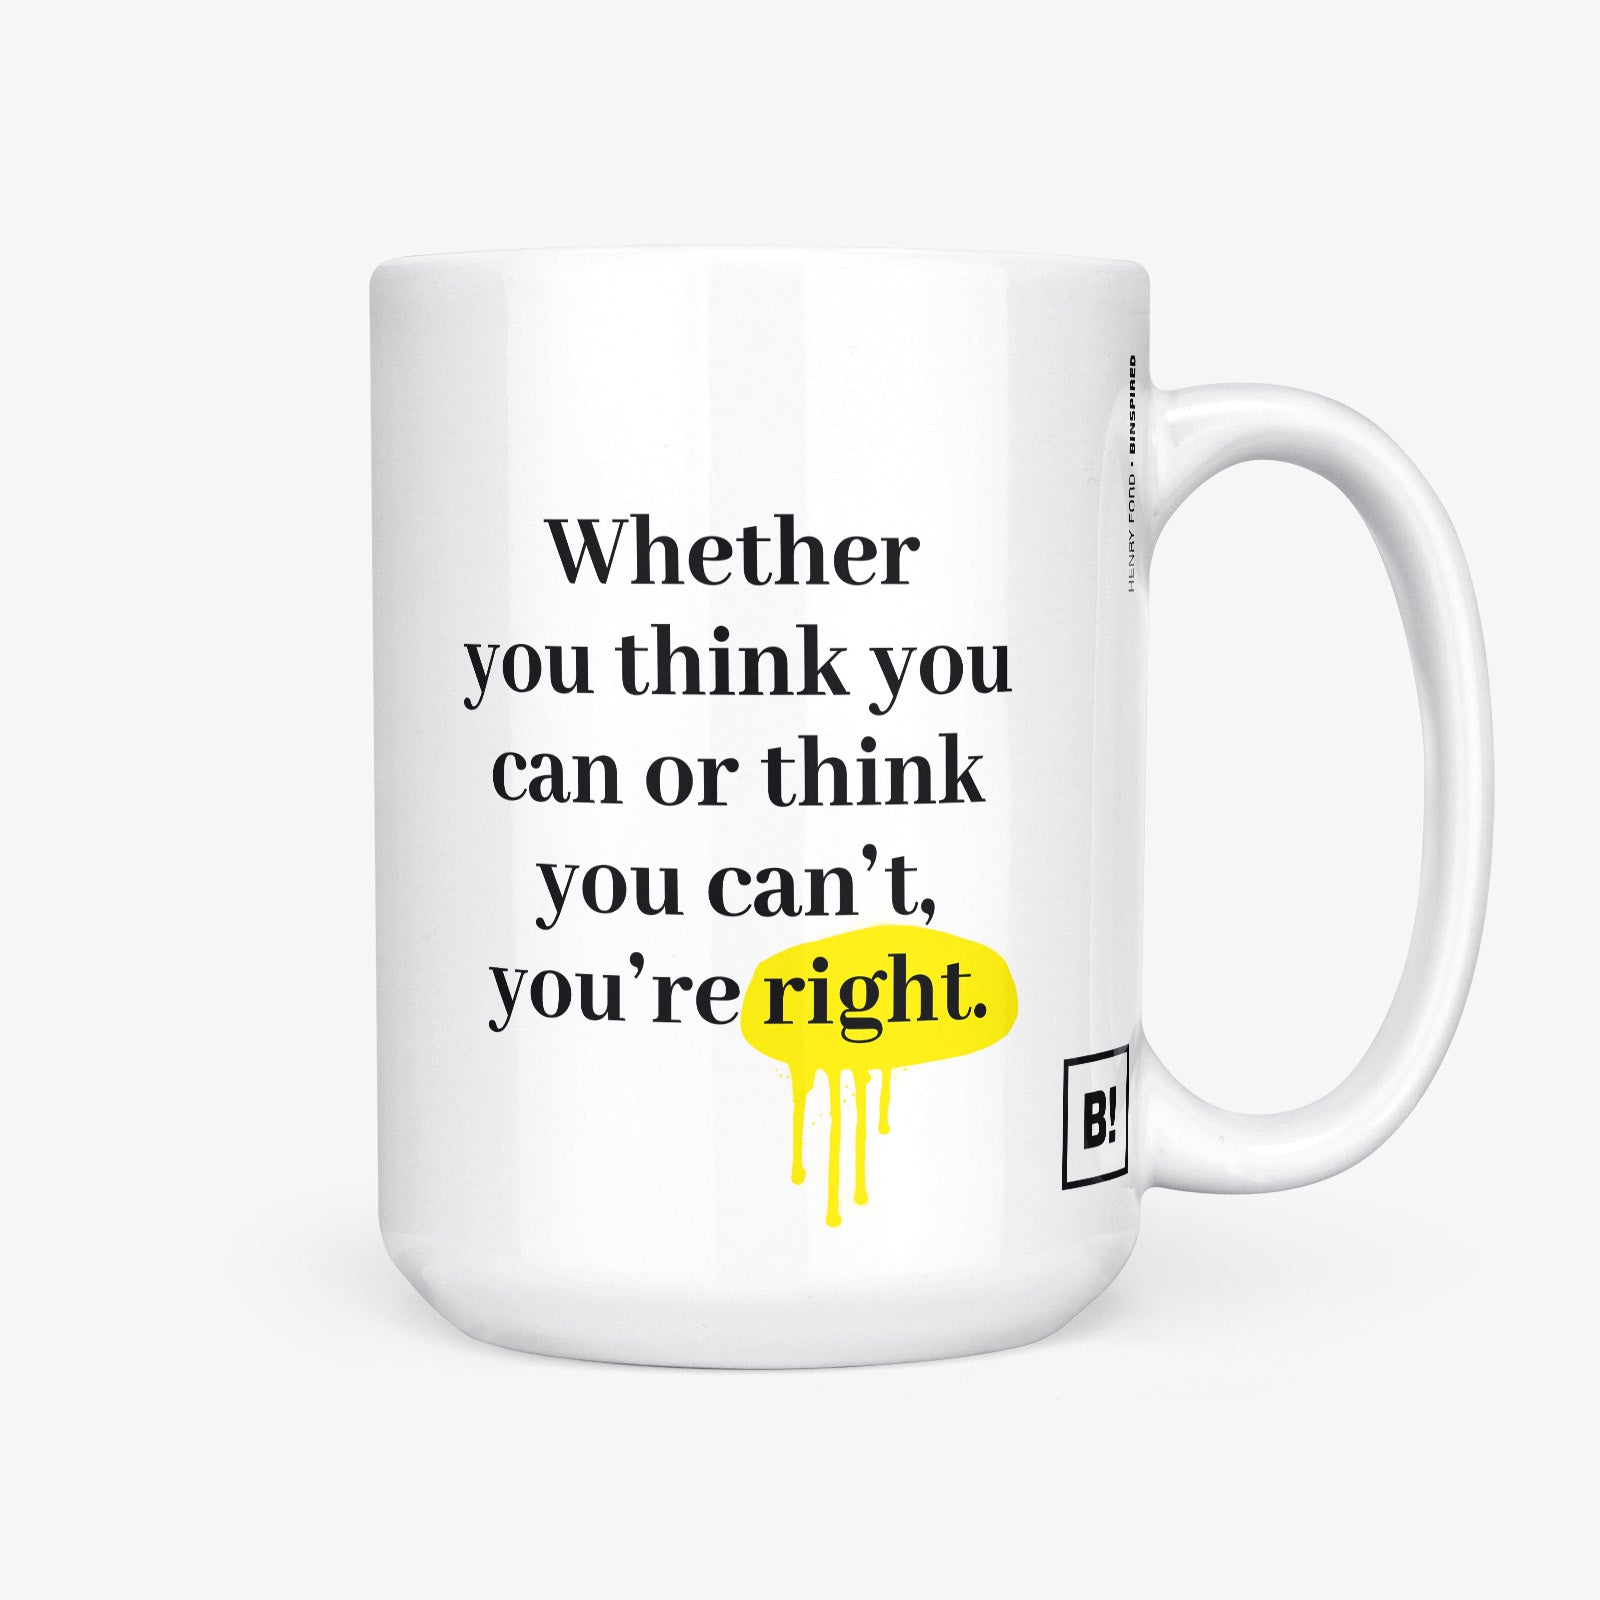 Be inspired by Henry Ford's famous quote, "Whether you think you can or think you can't, you're right" on this white and glossy 15oz coffee mug with the handle on the right.